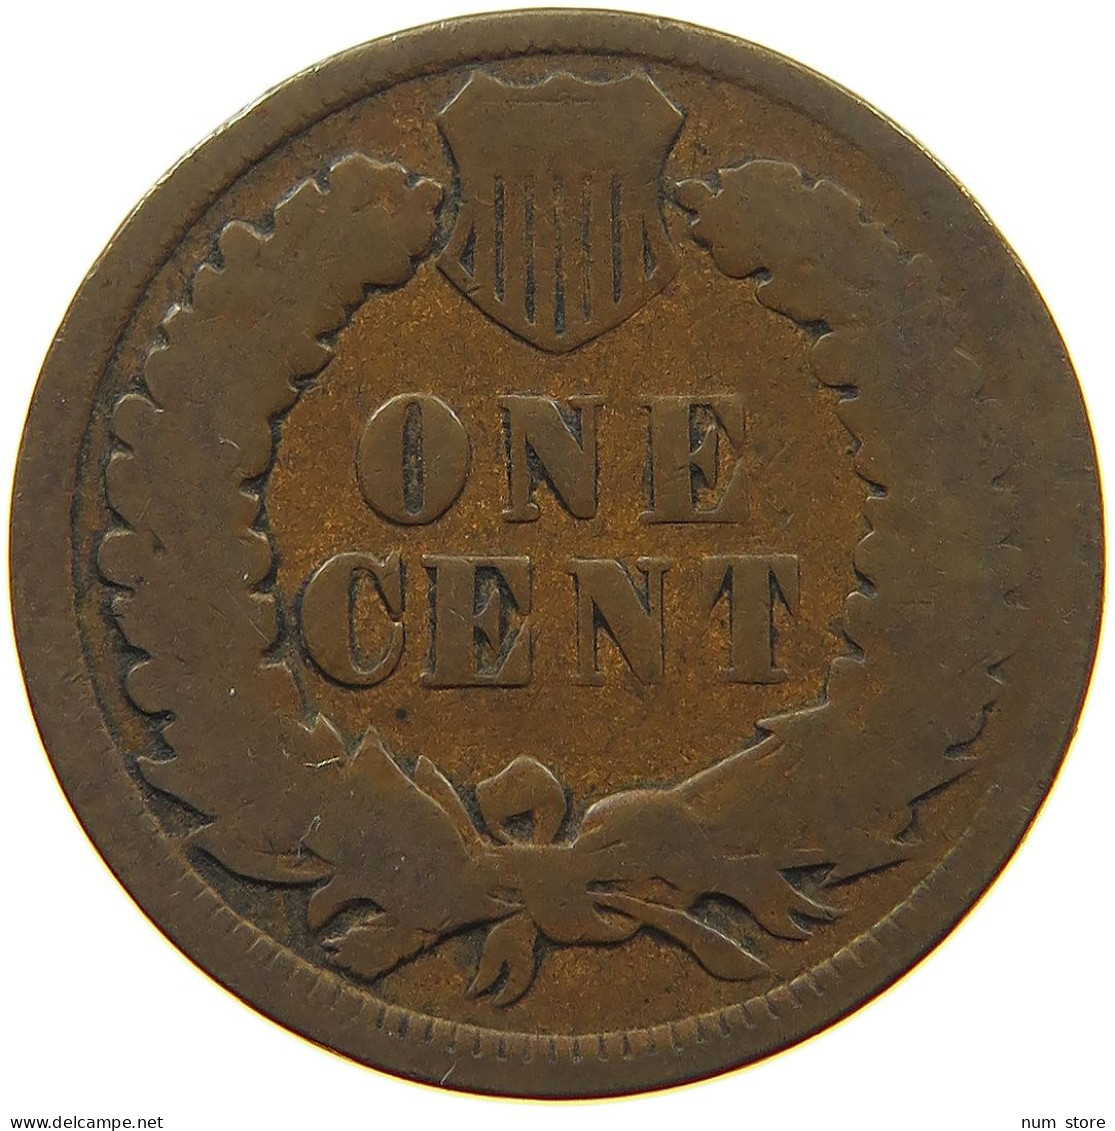 UNITED STATES OF AMERICA CENT 1897 INDIAN HEAD #s063 0249 - 1859-1909: Indian Head